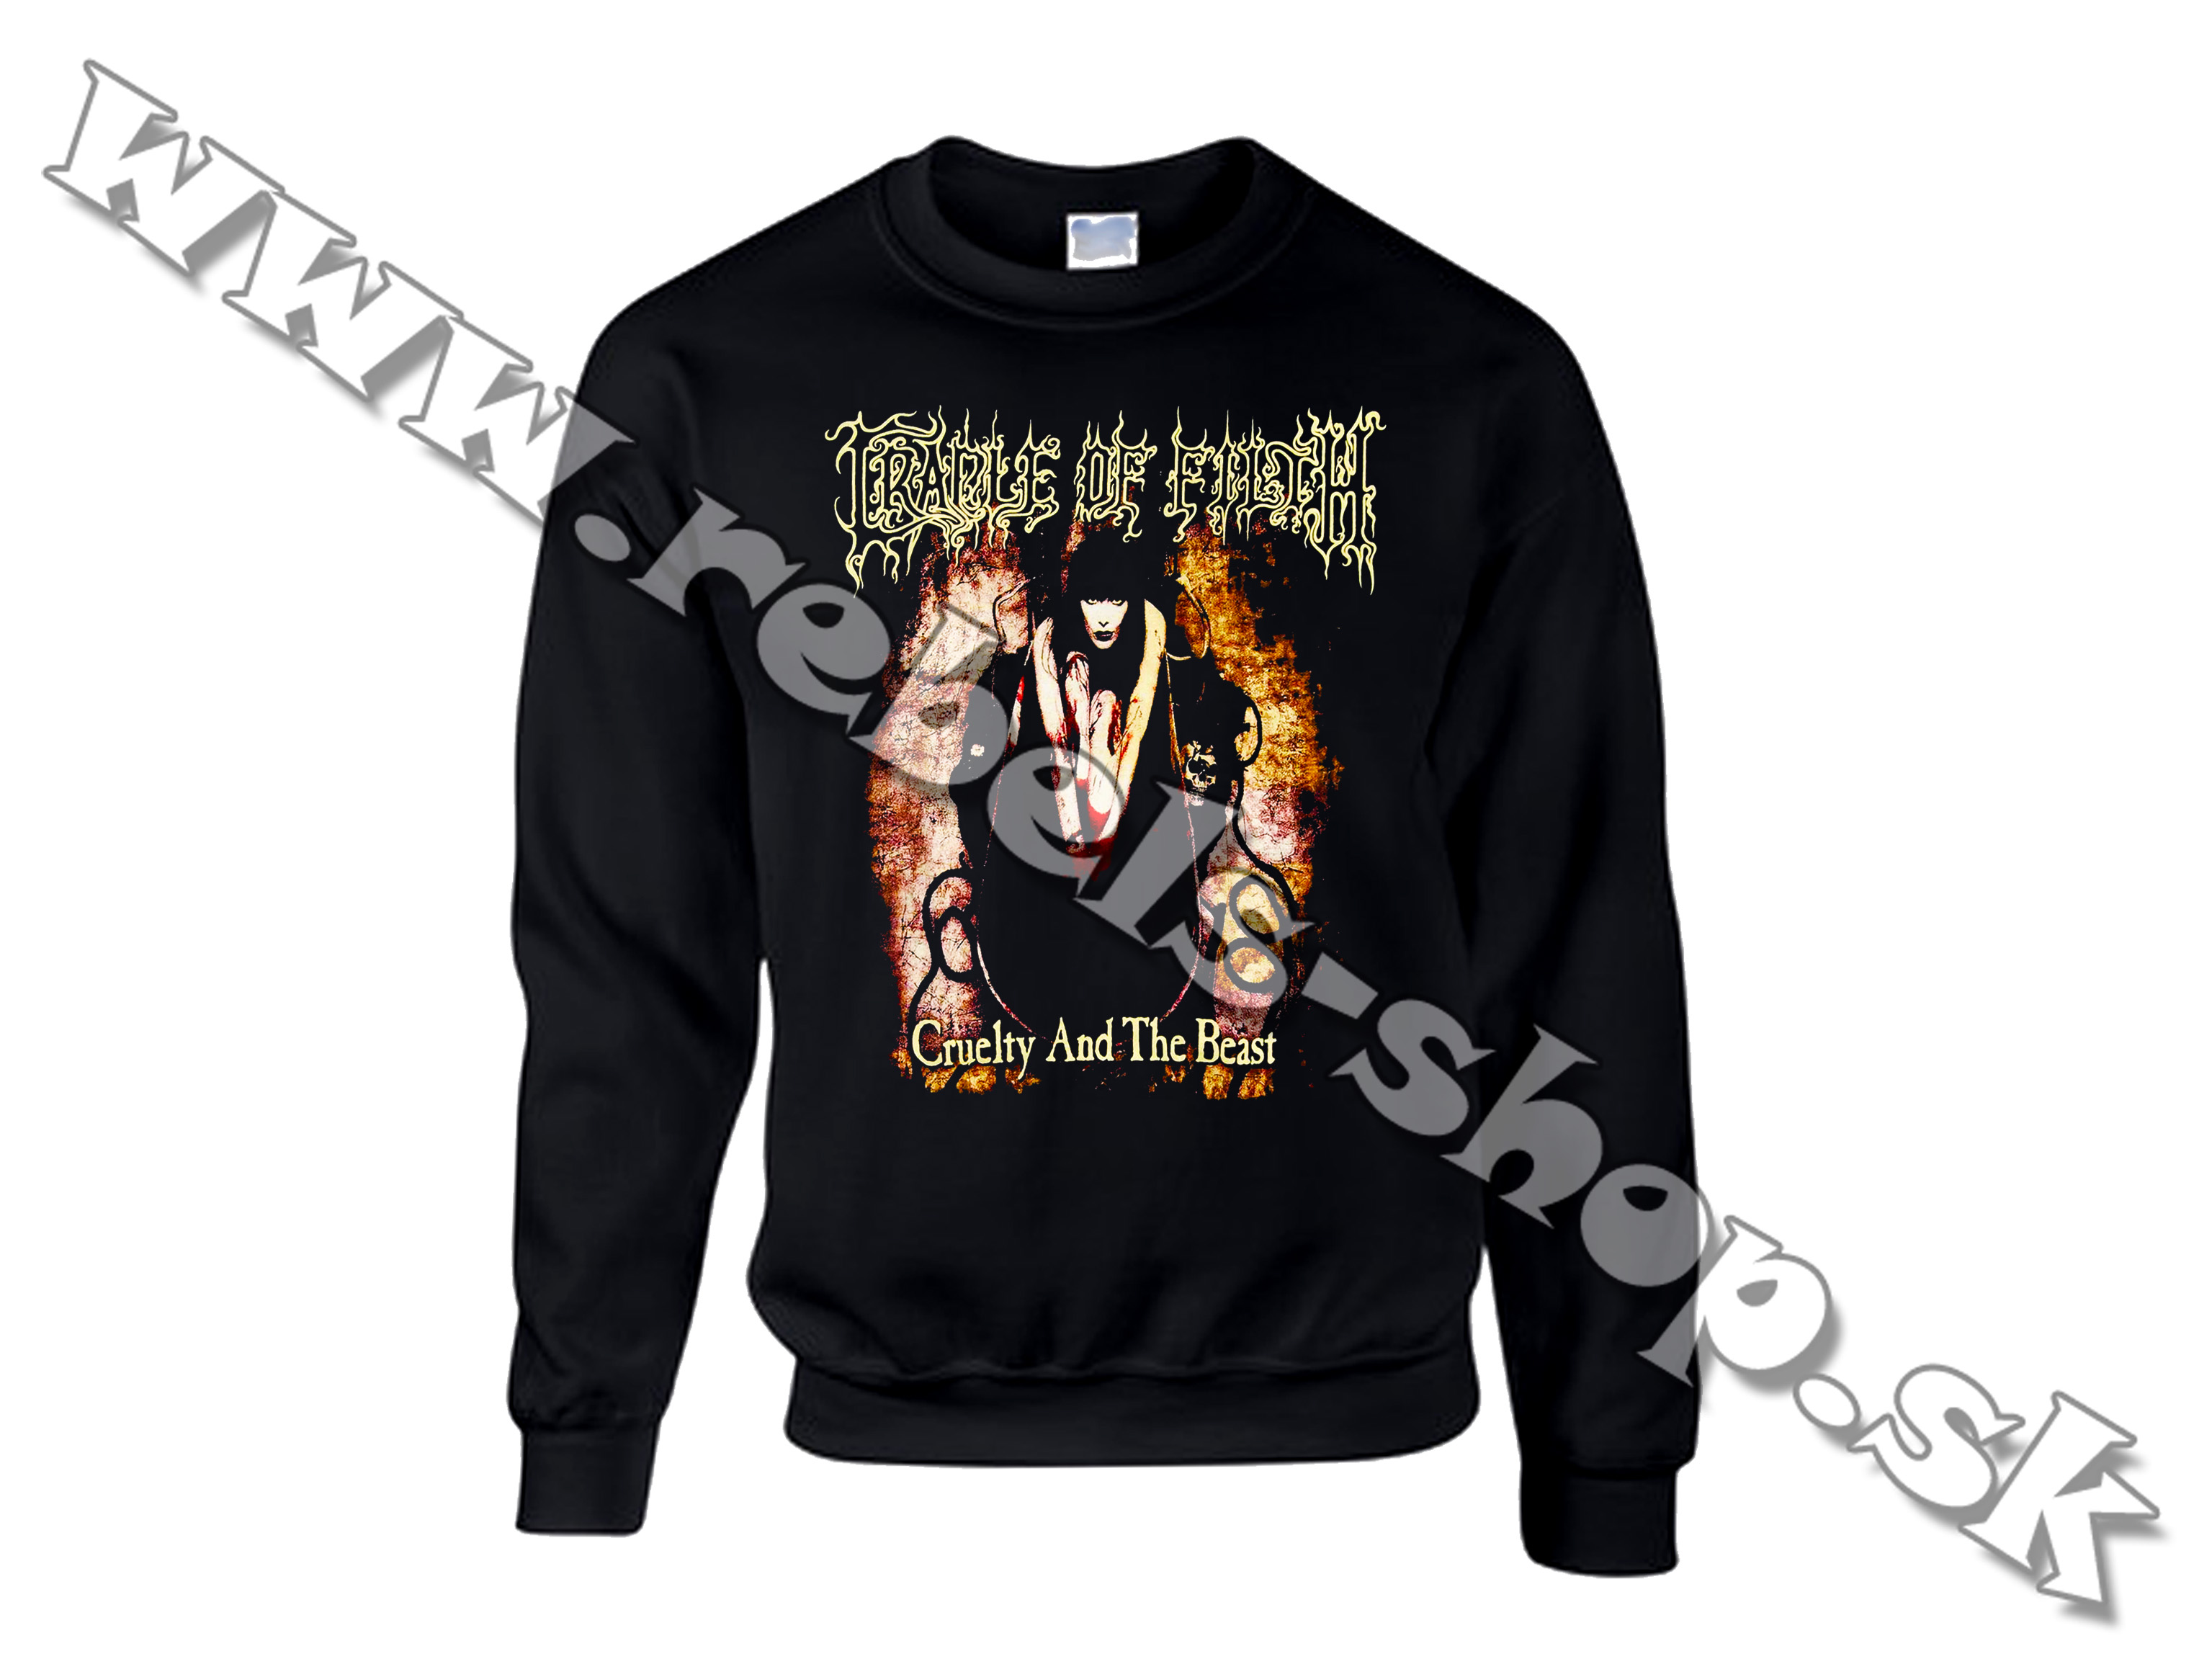 Mikina "Cradle of Filth"